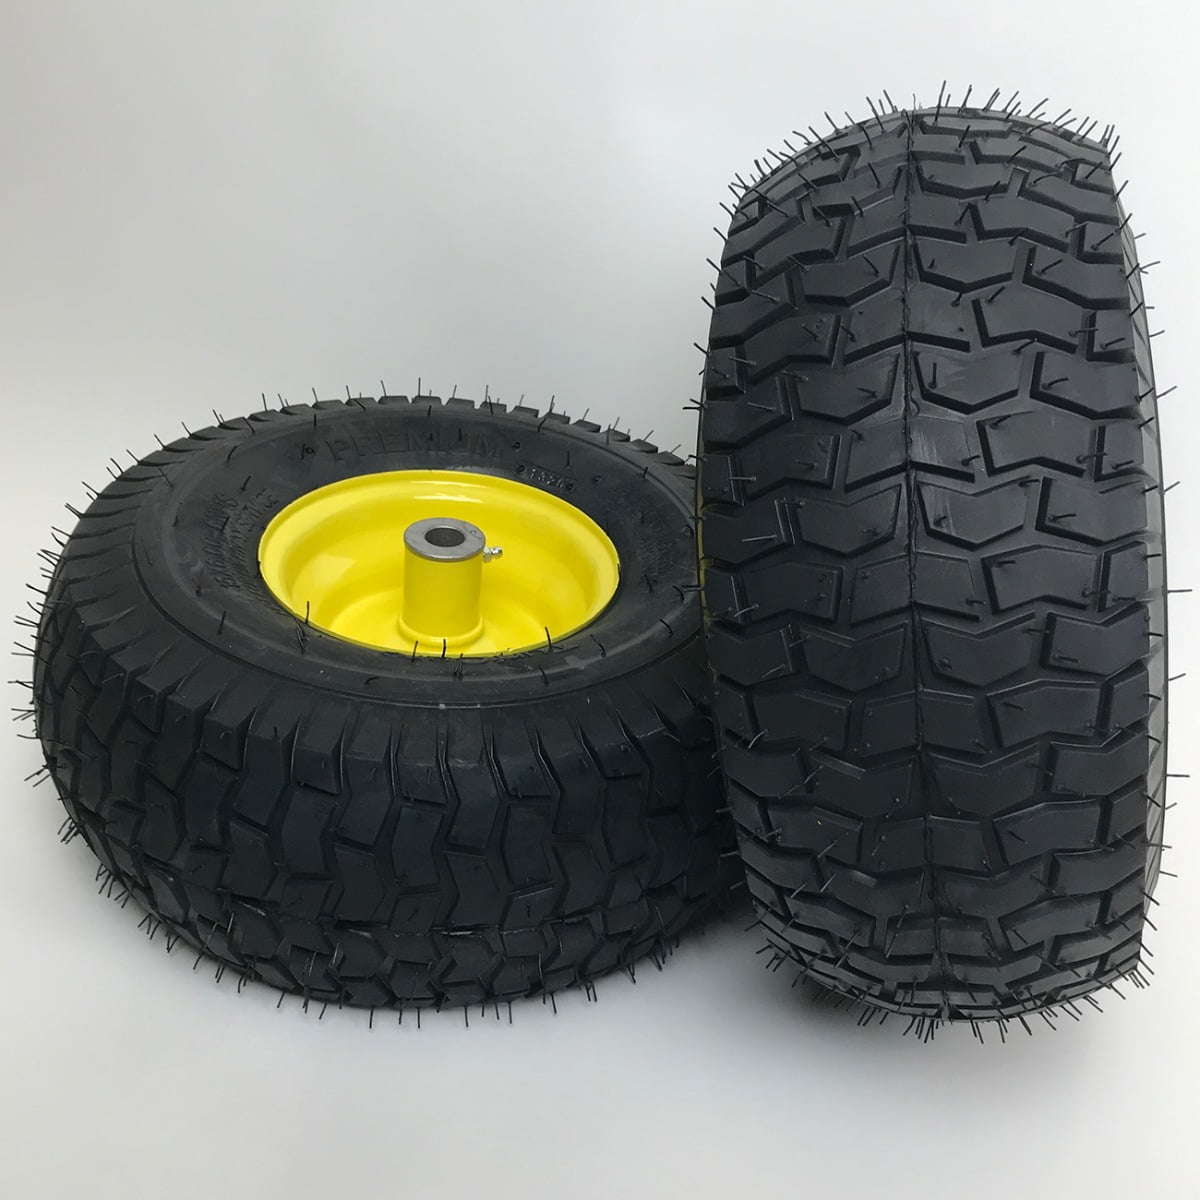 set-of-2-15x6-00-6-lawn-mower-tire-and-rim-fits-on-3-4-inch-axle